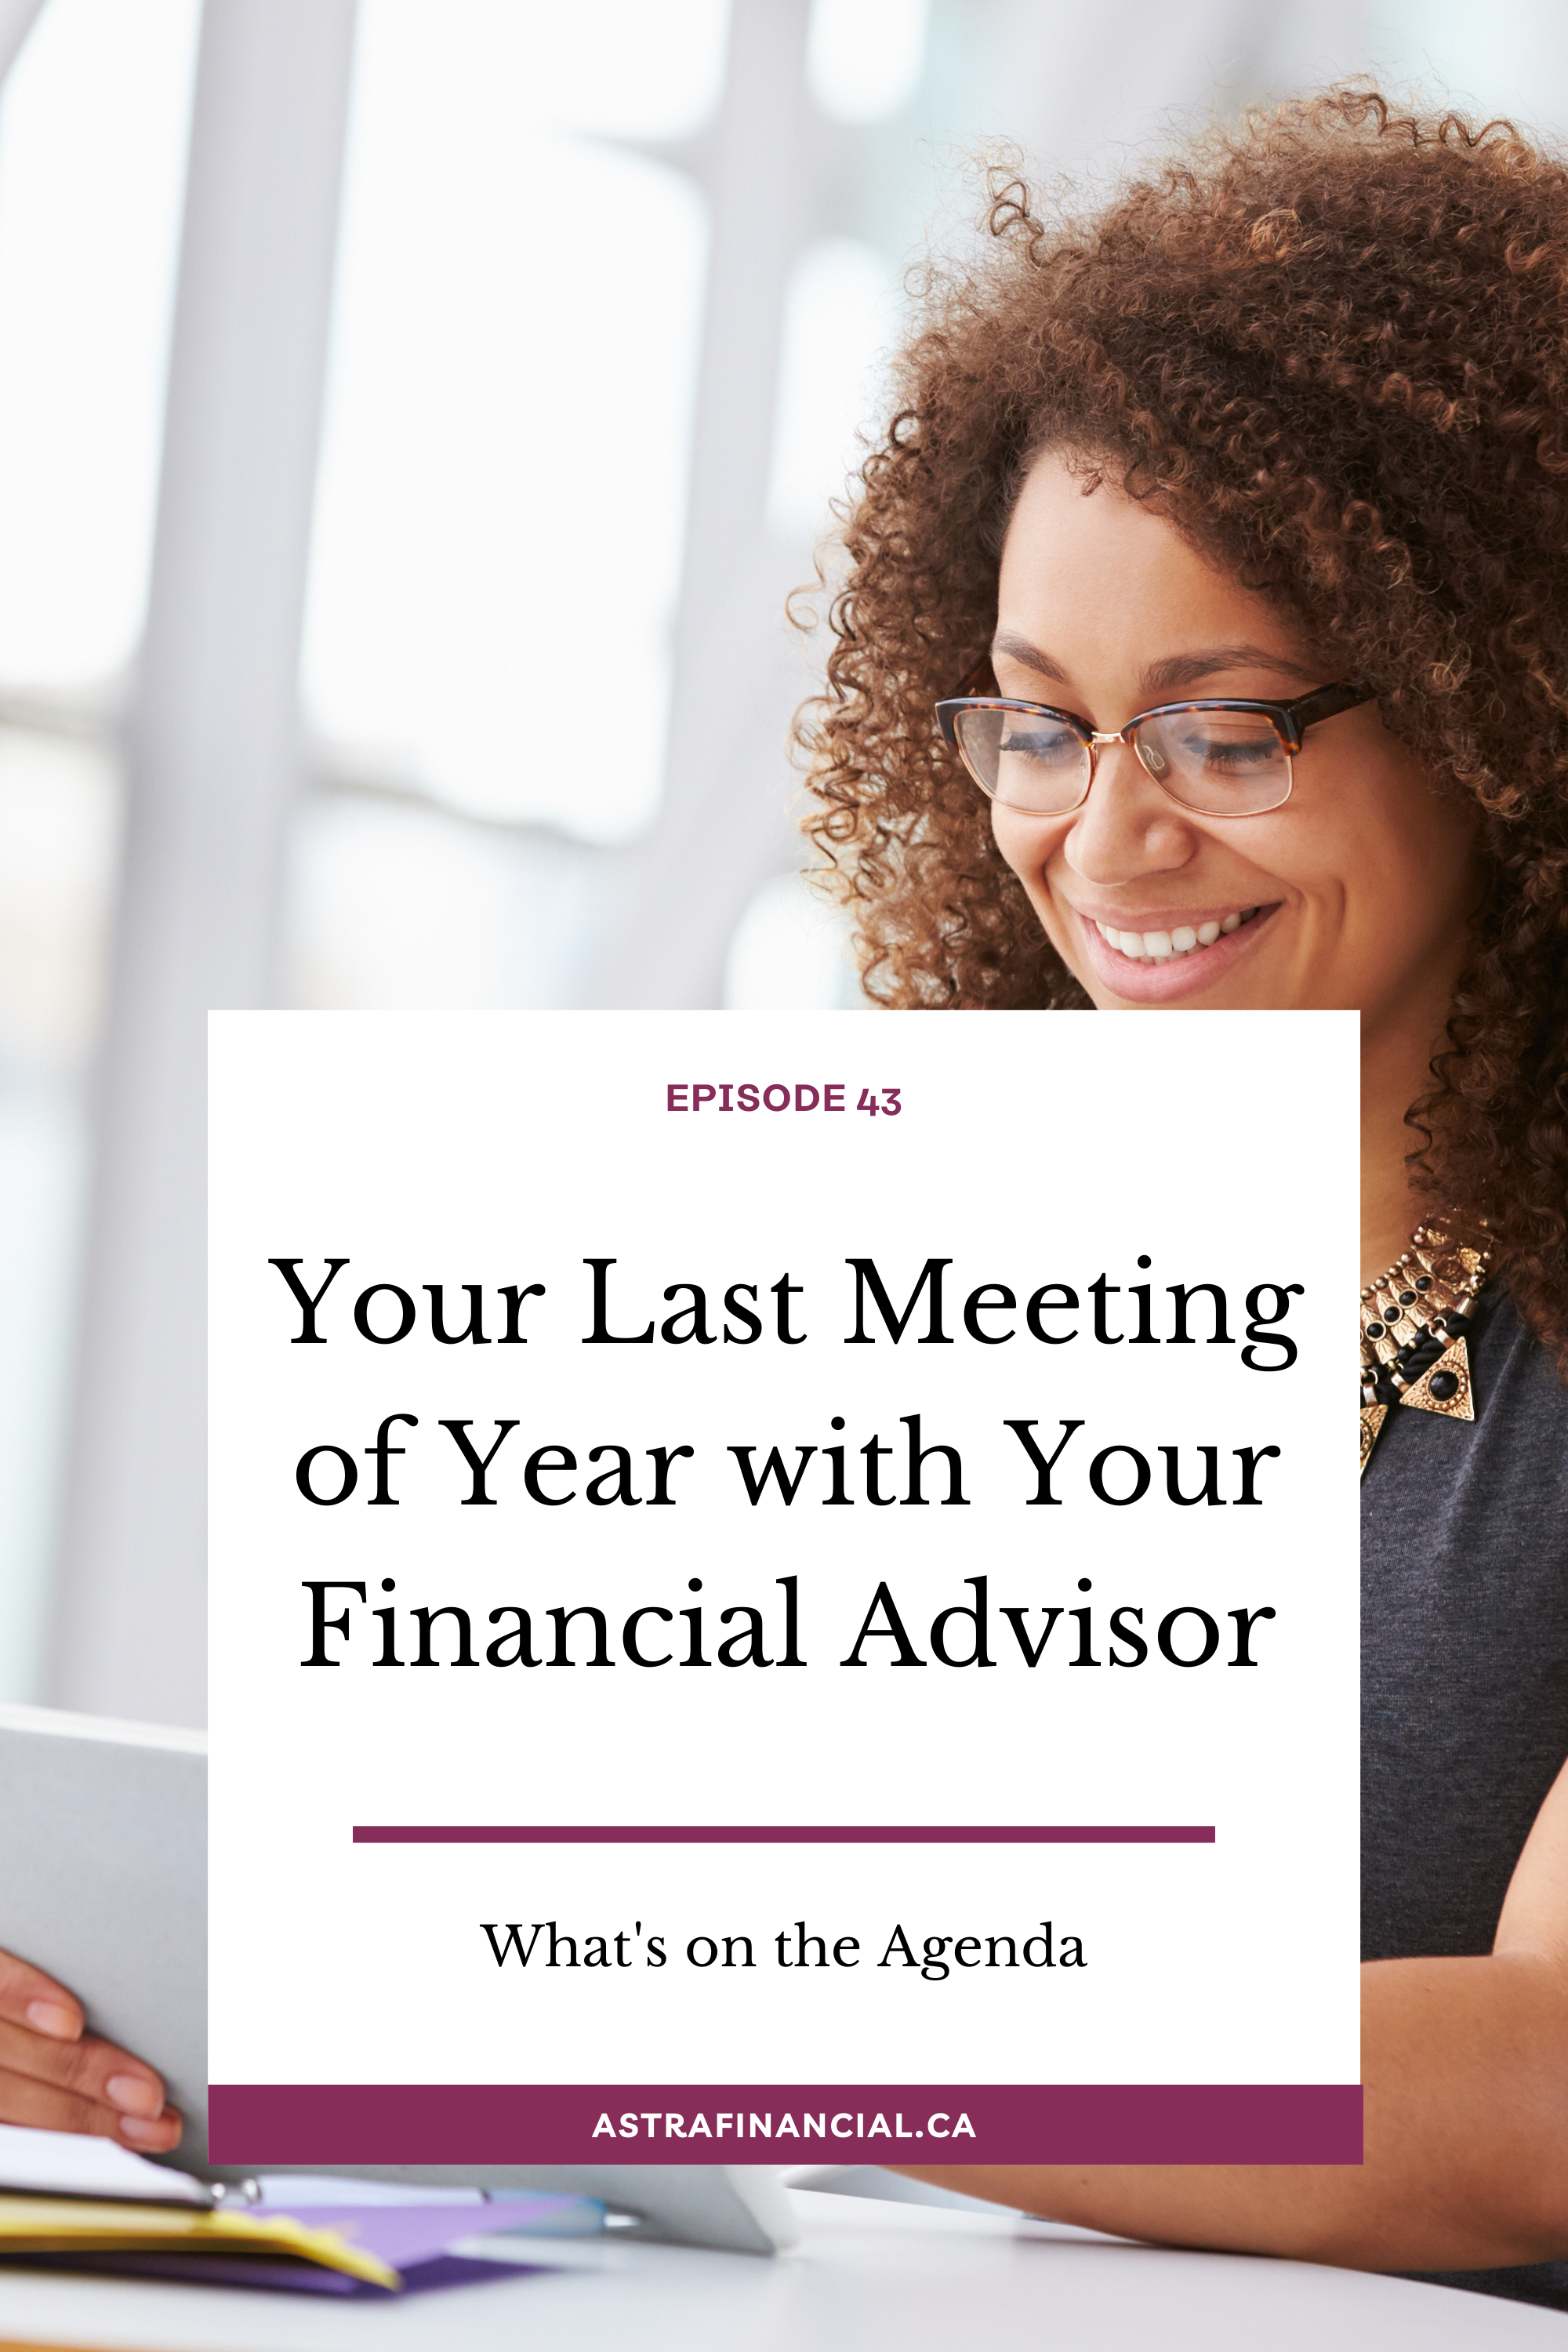 Episode 43 - Your Last Meeting of Year with Your Financial Advisor by Astra Financial